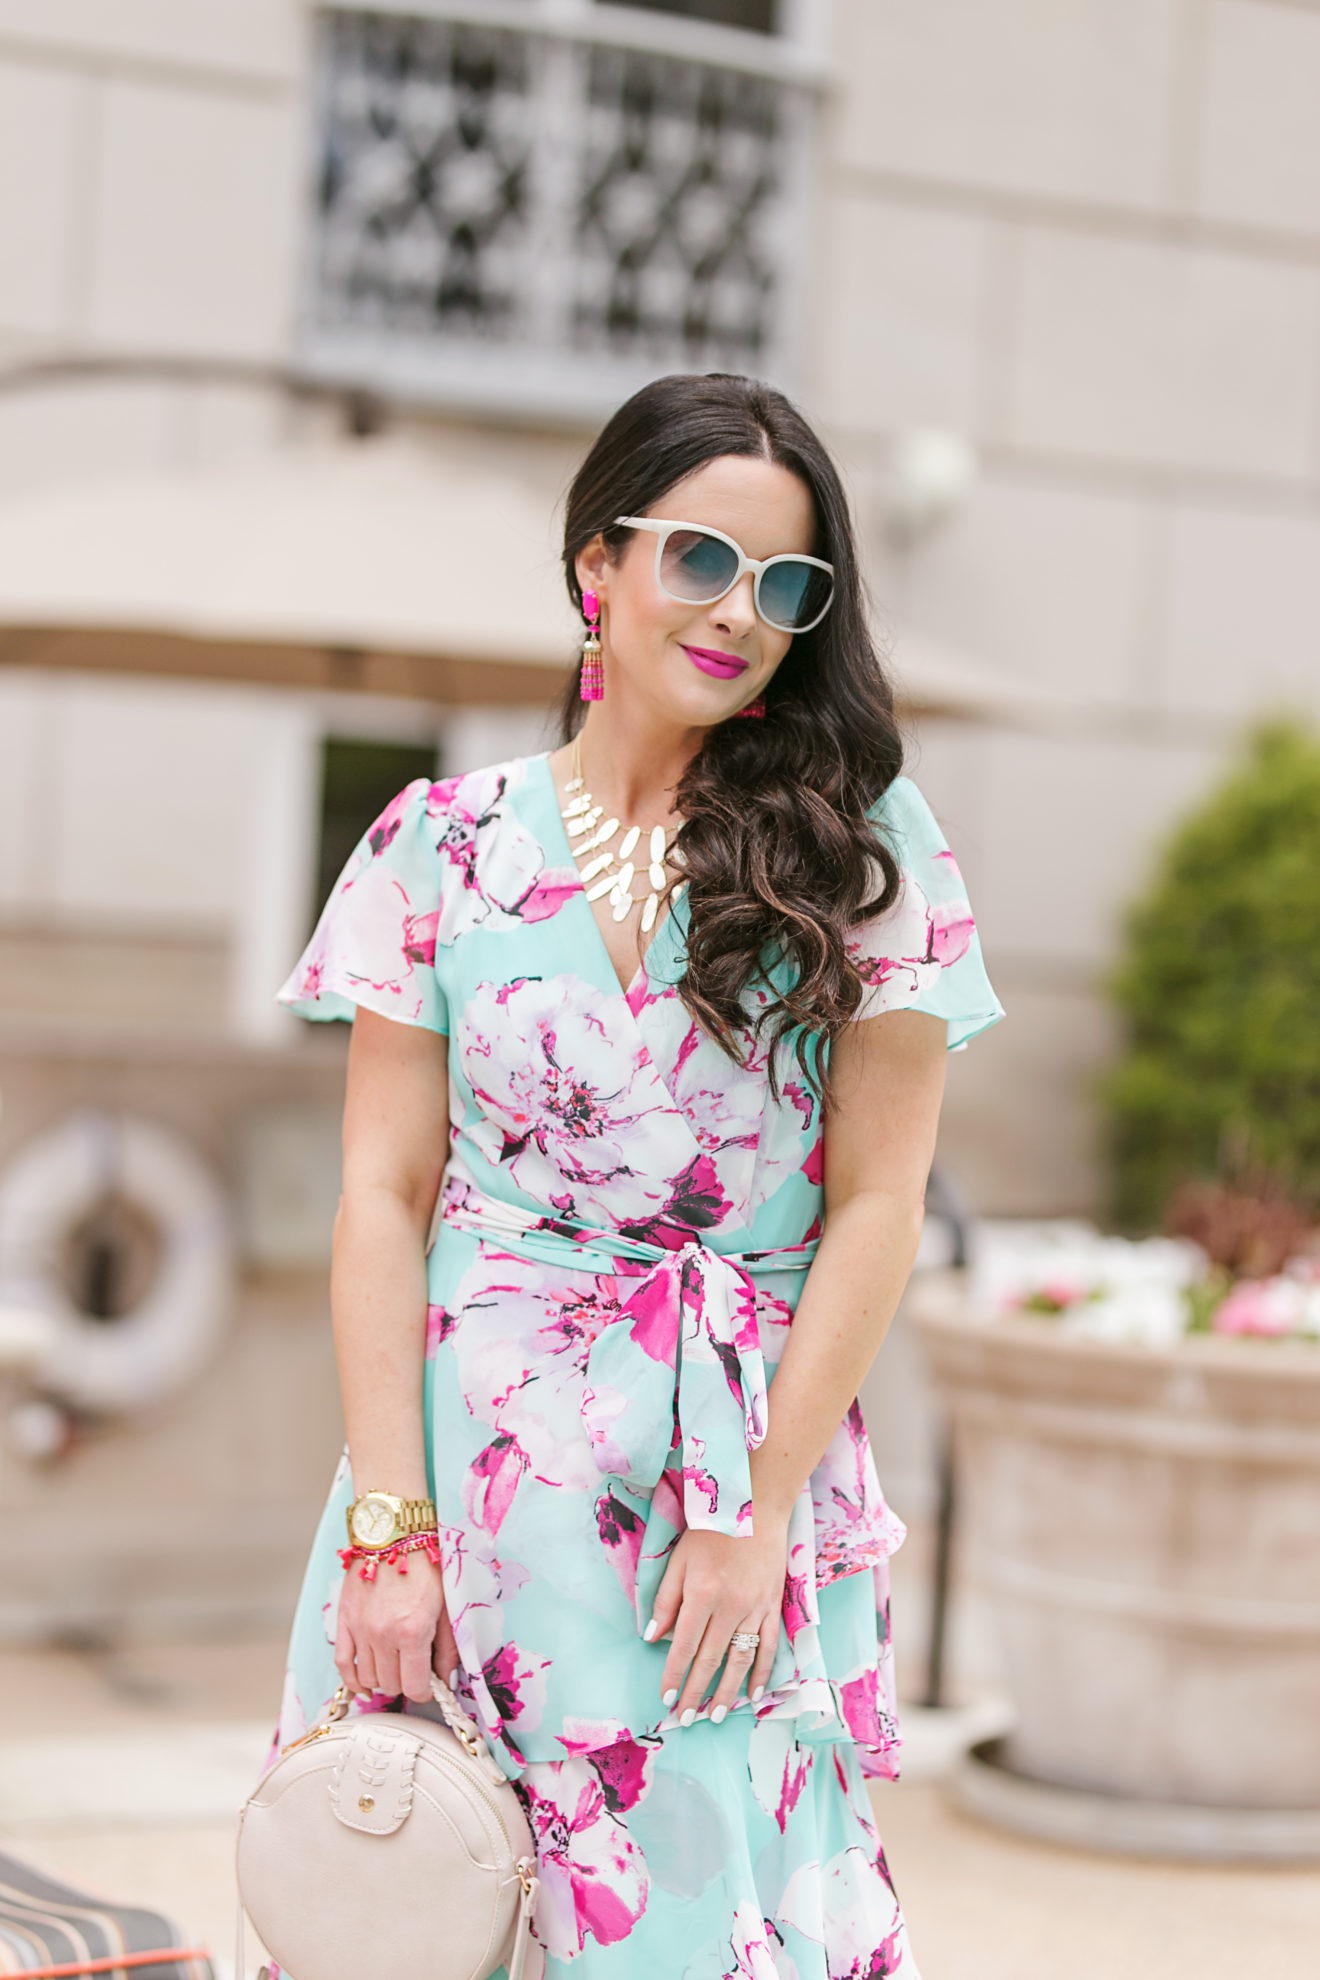 Summer Dress Giveaway! + Kendra Scott Up To 25% Off Promo!